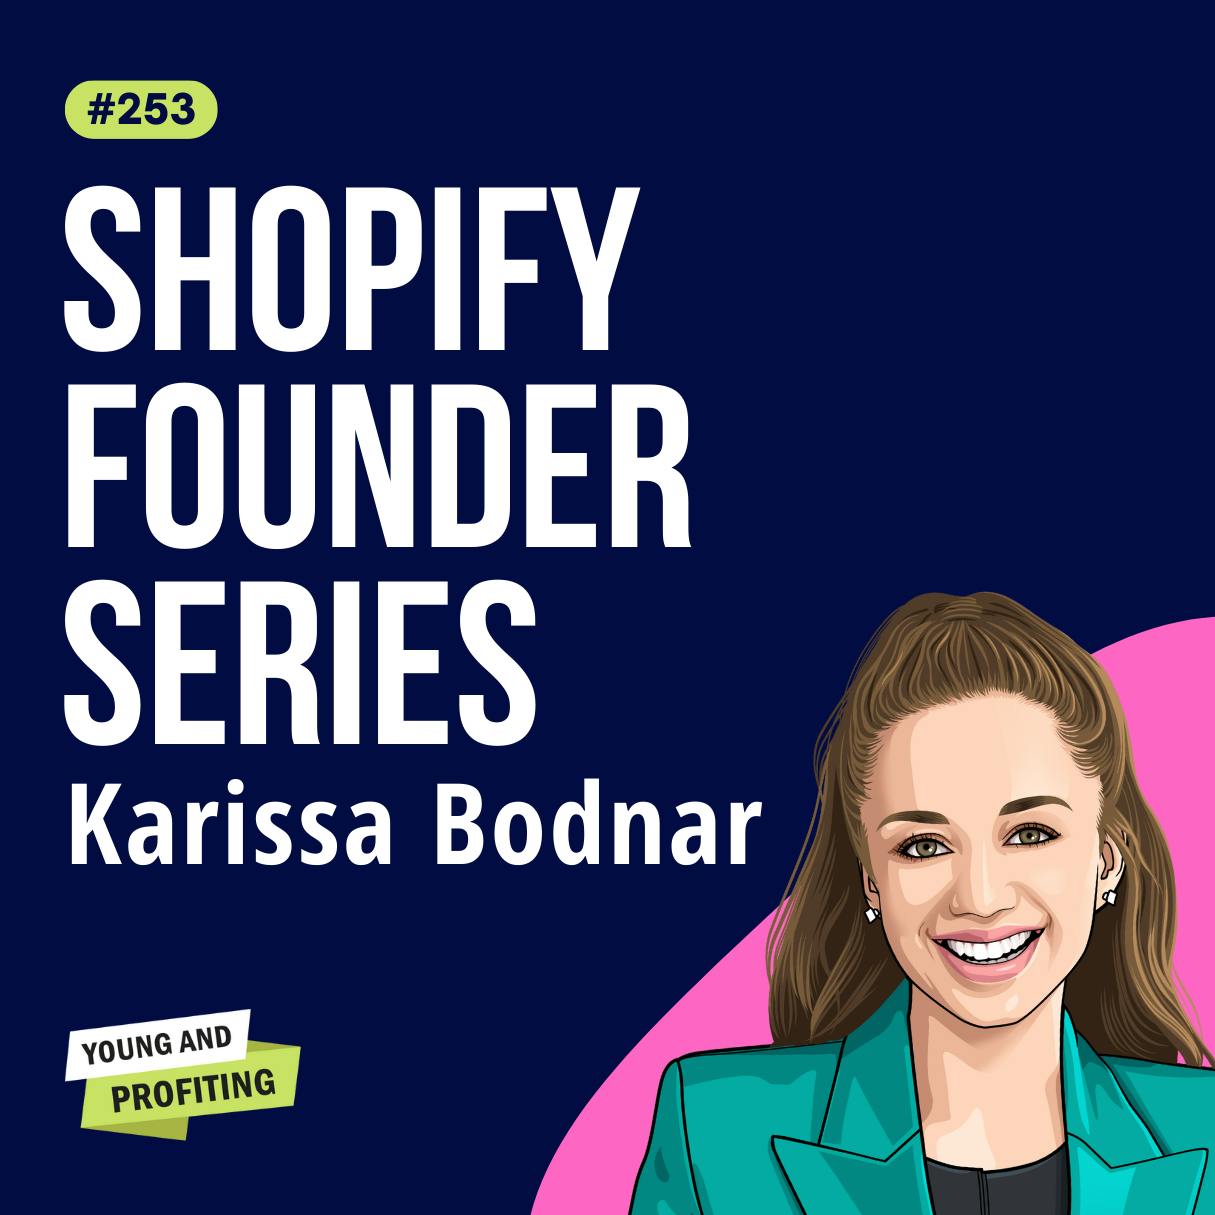 Karissa Bodnar, Thrive Causemetics Founder: Entrepreneurship Gave Me The Freedom To Donate $150M in Value to Over 500 Charities | E253